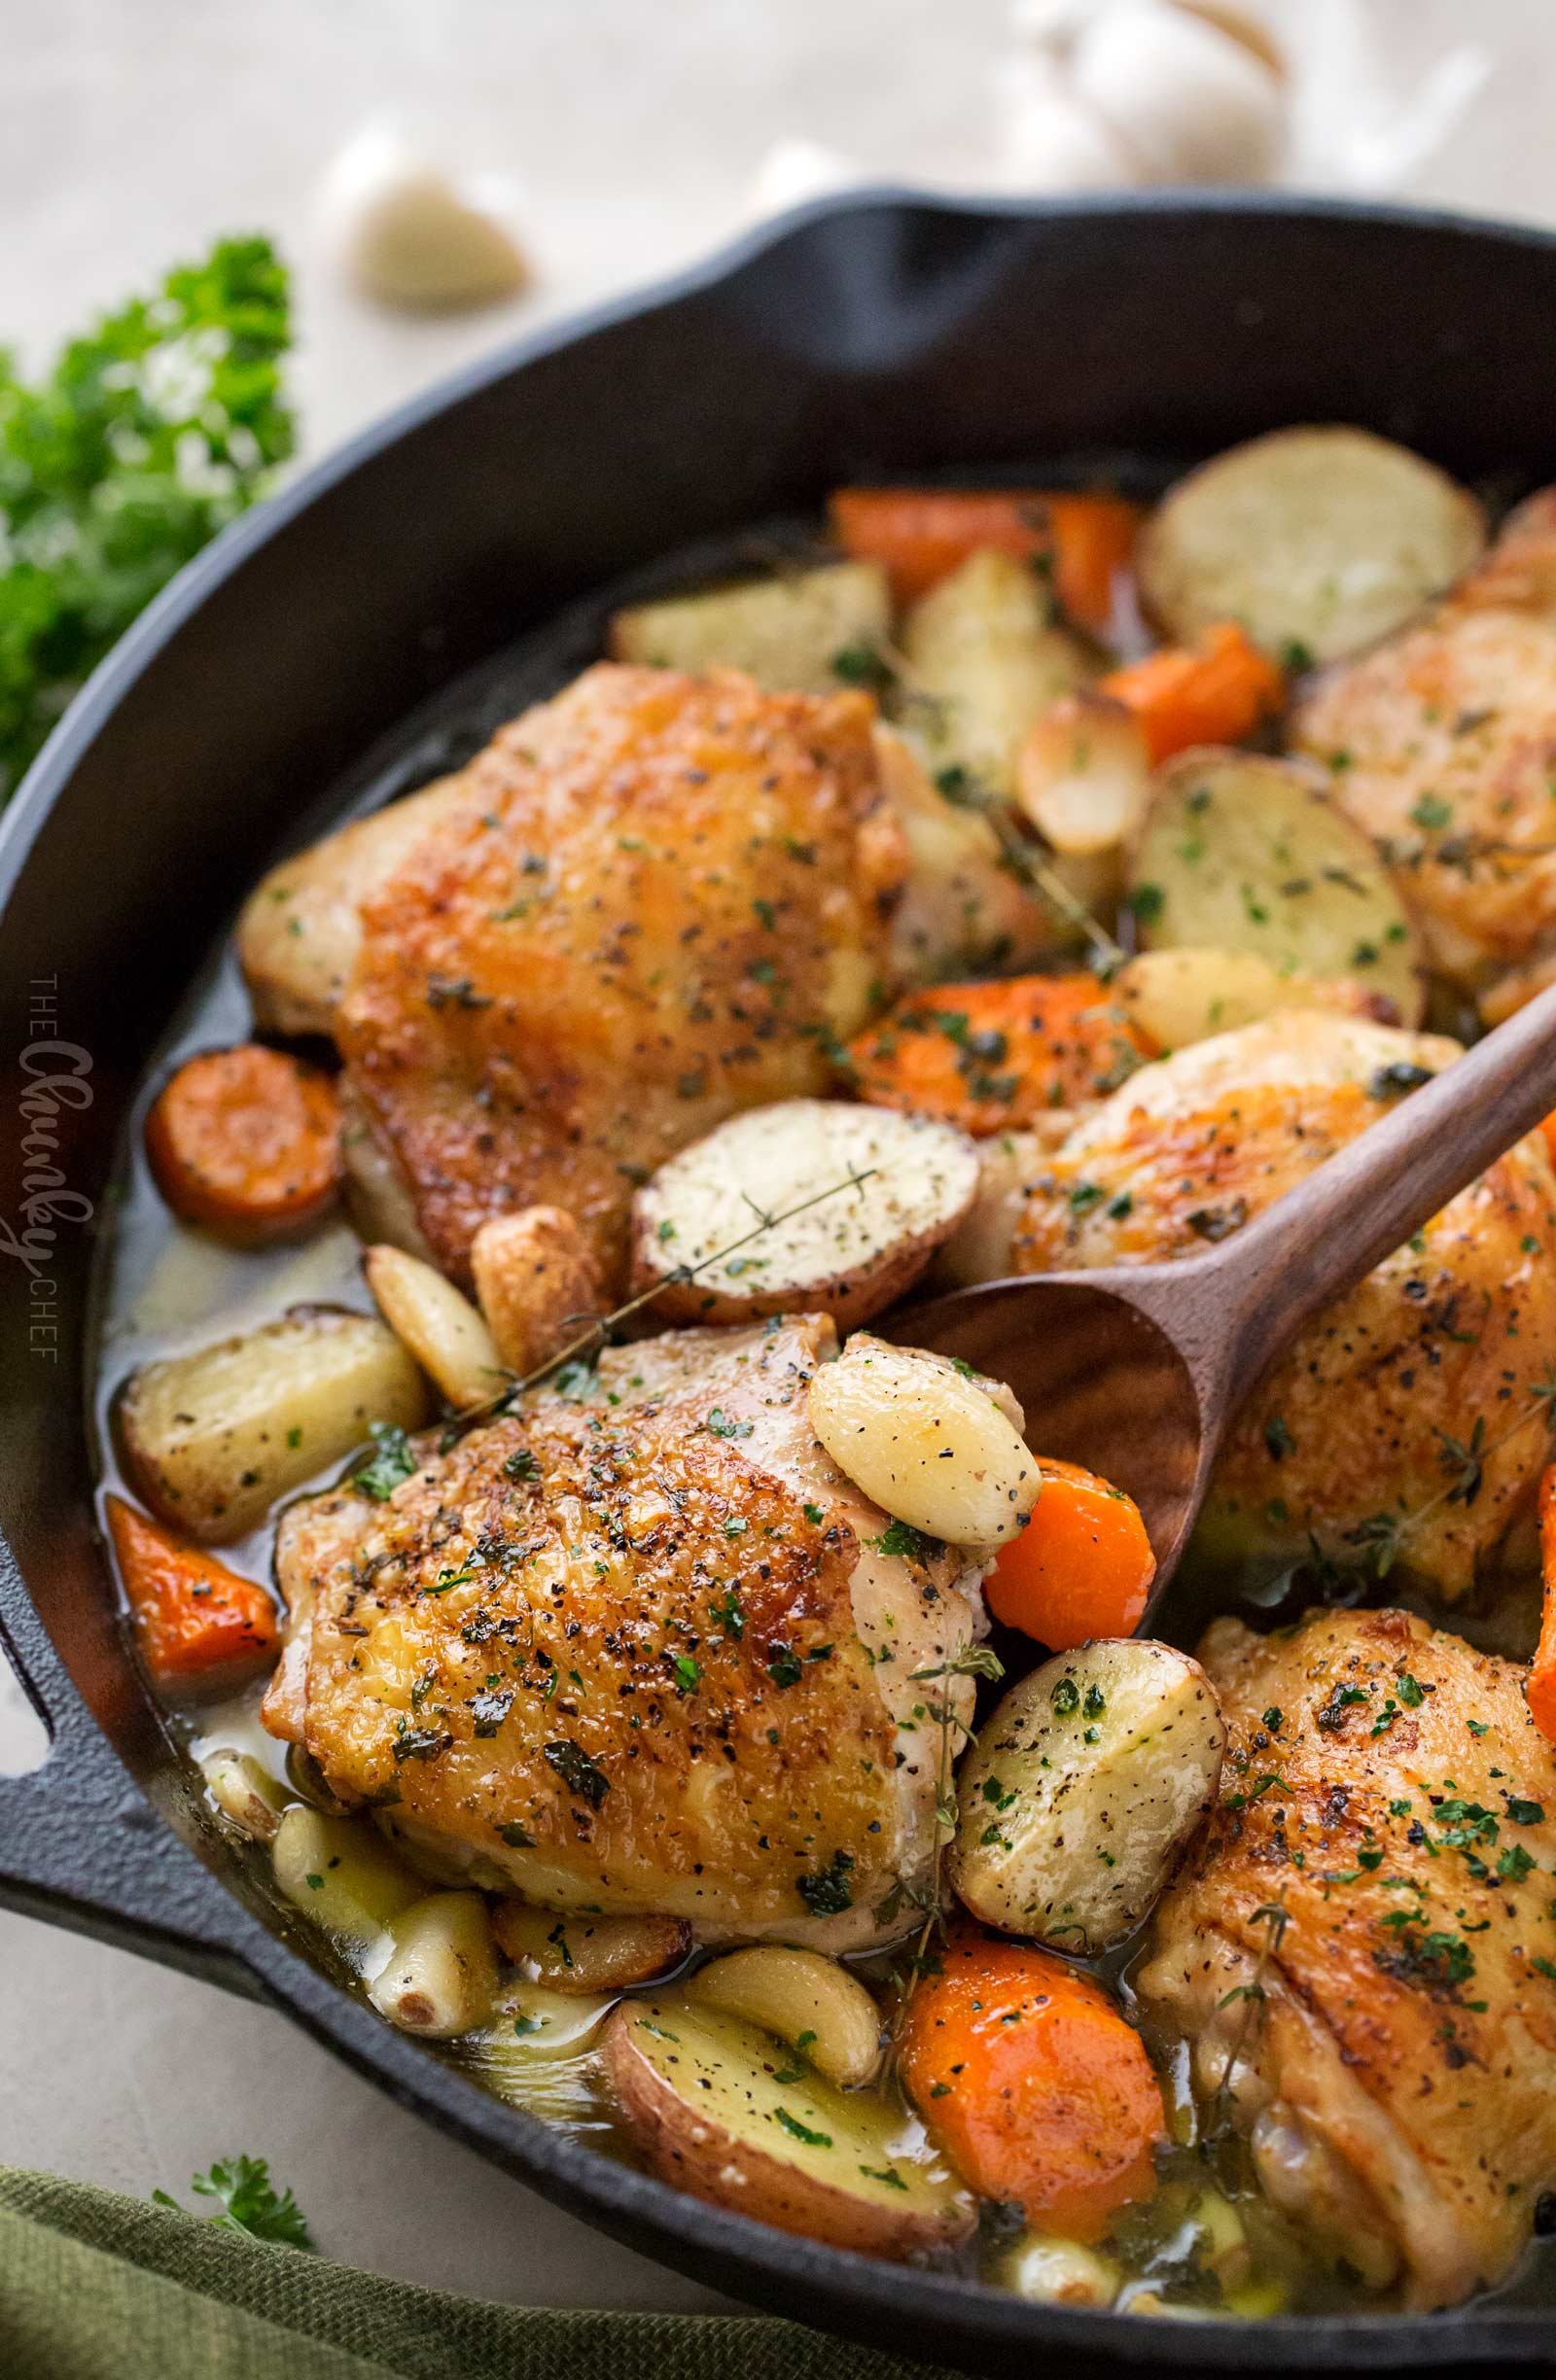 Roasted chicken thighs with garlic and potatoes